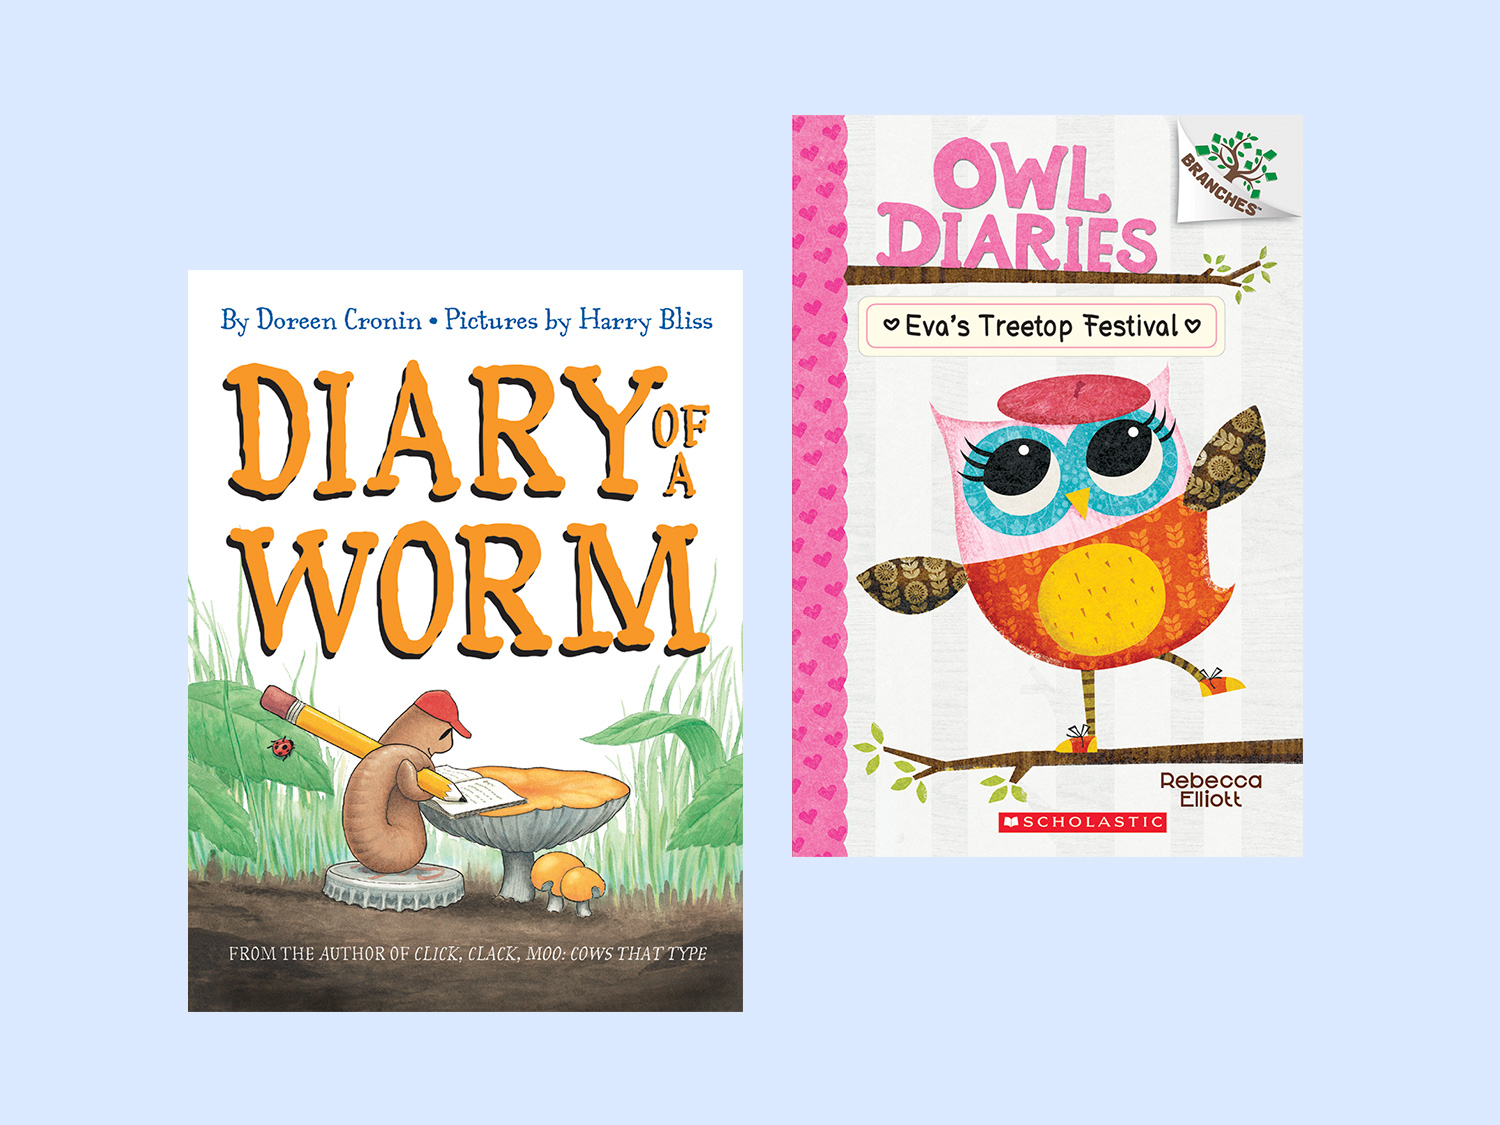 Dear Diary: Journal-Style Fiction for School-Age Readers | Scholastic